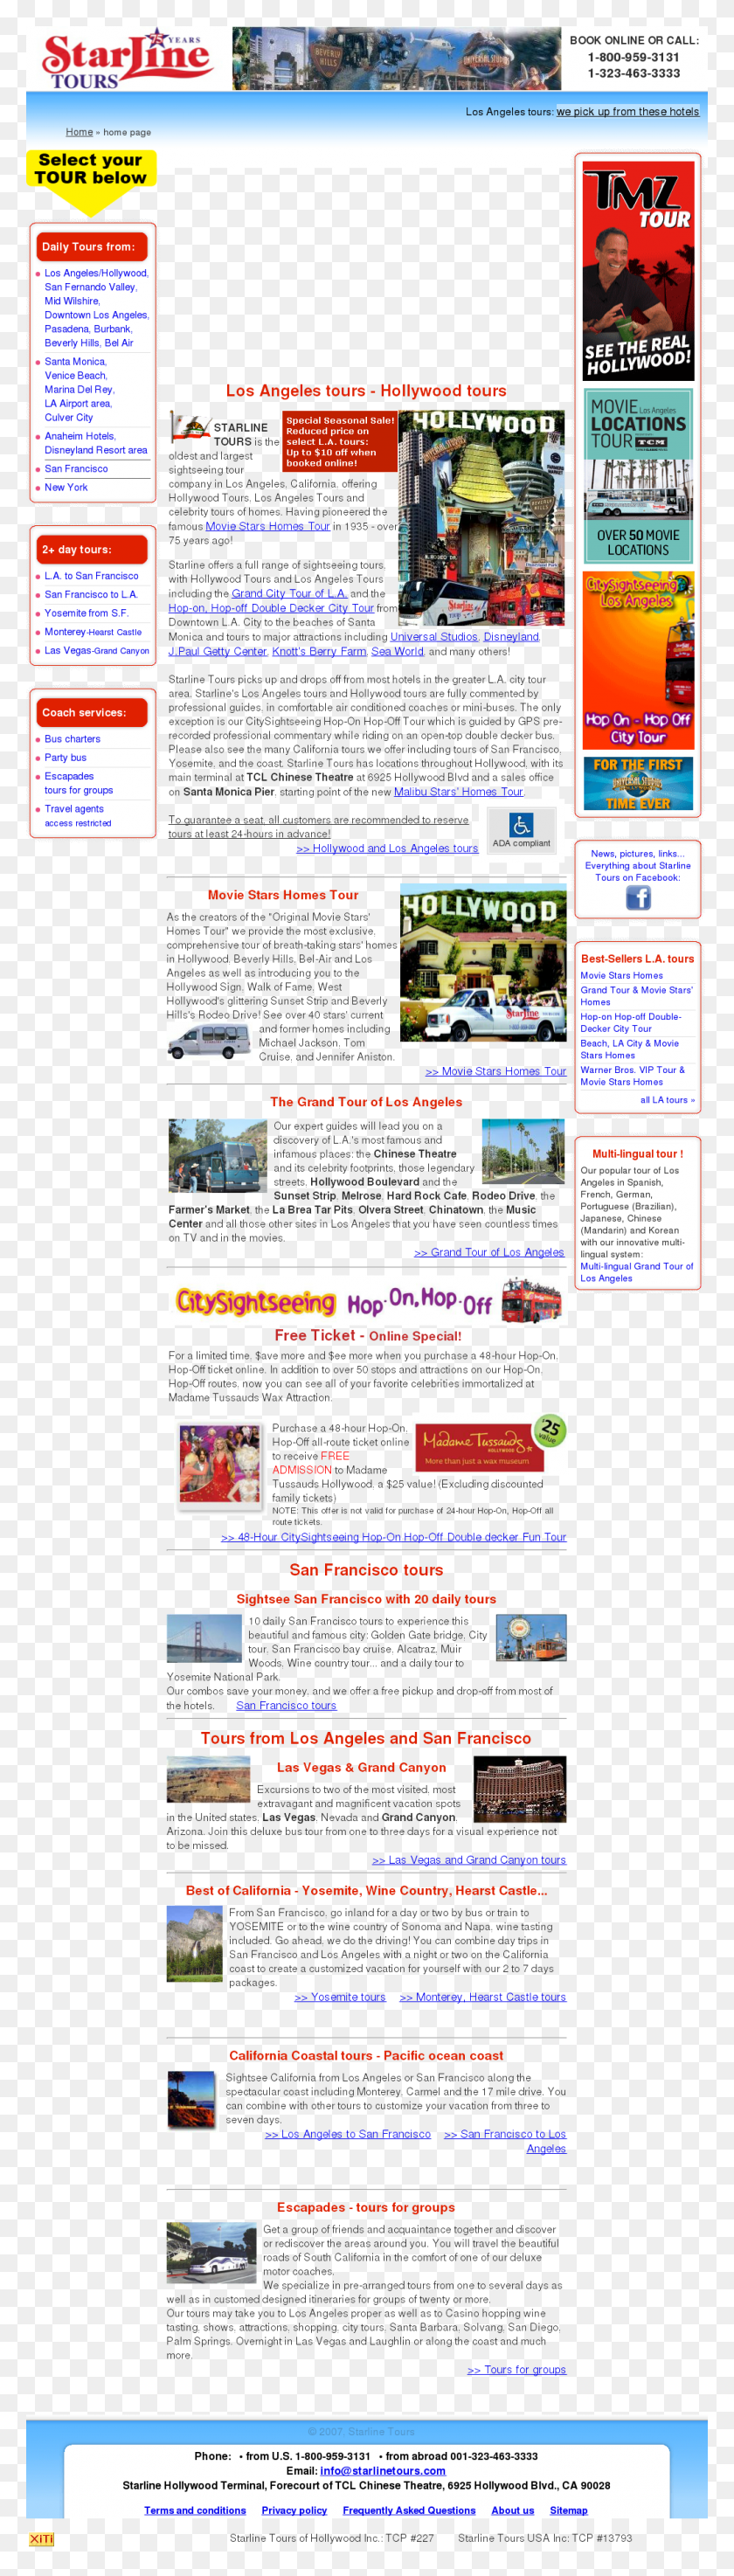 1024x3792 Starline Tours In Hollywood Competitors Revenue And Starline Tours, Publicidad, Cartel, Flyer Hd Png